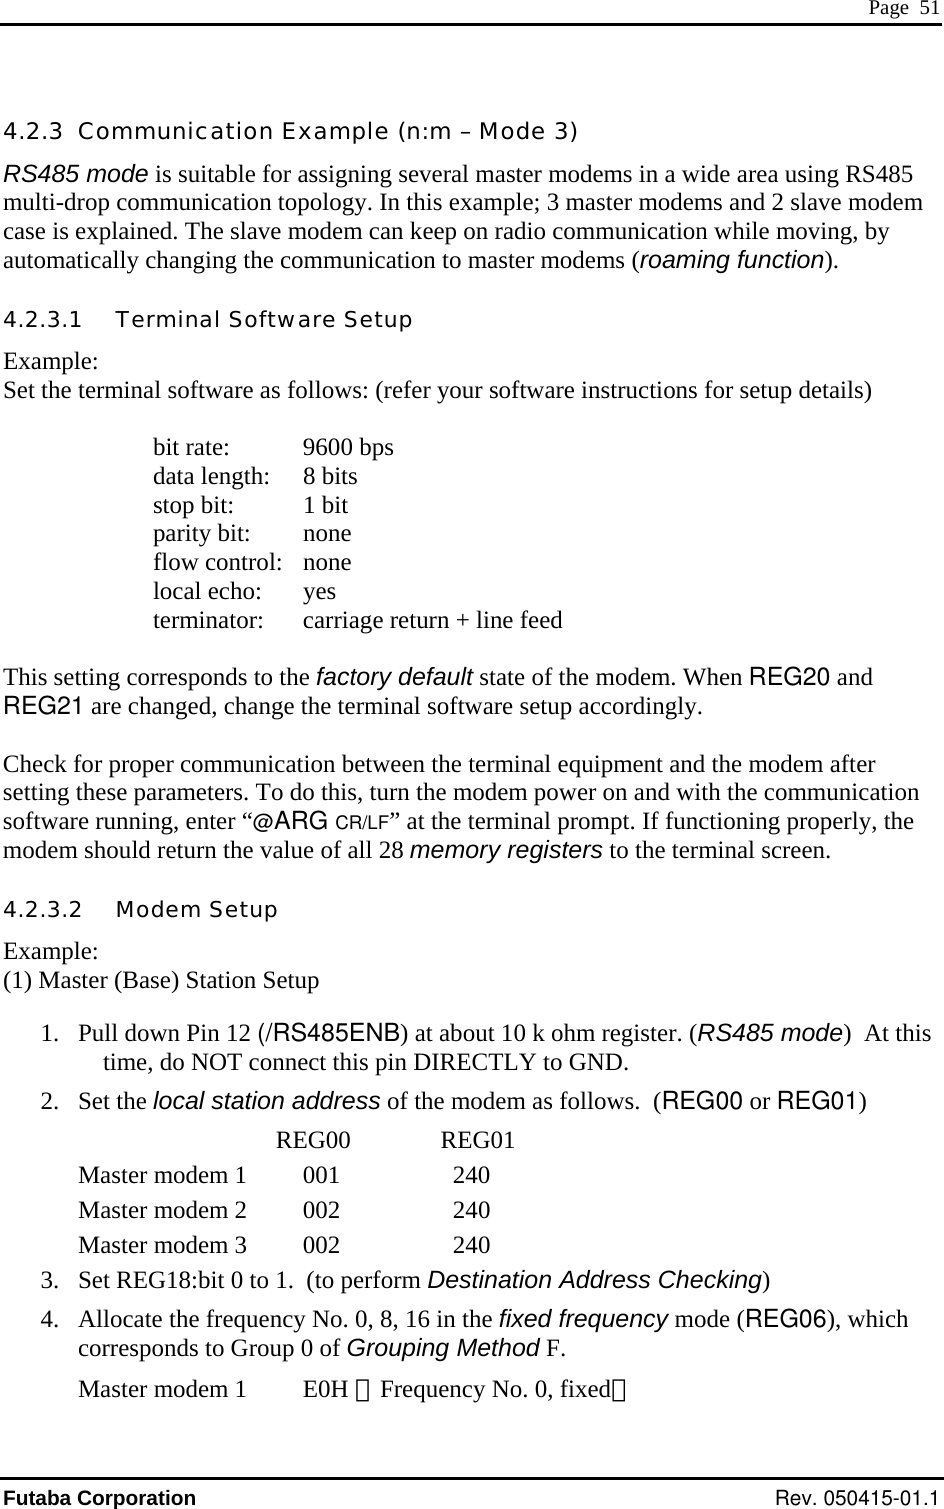  Page  51 4.2.3  Communication Example (n:m – Mode 3) RS485 mode is suitable for assigning several master modems in a wide area using RS485 multi-drop communication topology. In this example; 3 master modems and 2 slave modem case is explained. The slave modem can keep on radio communication while moving, by automatically changing the communication to master modems (roaming function).   4.2.3.1   Terminal Software Setup Example: Set the terminal software as follows: (refer your software instructions for setup details)    bit rate: 9600 bps      data length:  8 bits      stop bit:  1 bit      parity bit:  none      flow control:  none      local echo:  yes      terminator:  carriage return + line feed  This setting corresponds to the factory default state of the modem. When REG20 and REG21 are changed, change the terminal software setup accordingly.   Check for proper communication between the terminal equipment and the modem after setting these parameters. To do this, turn the modem power on and with the communication software running, enter “@ARG CR/LF” at the terminal prompt. If functioning properly, the modem should return the value of all 28 memory registers to the terminal screen. 4.2.3.2   Modem Setup Example: (1) Master (Base) Station Setup  1.  Pull down Pin 12 (/RS485ENB) at about 10 k ohm register. (RS485 mode)  At this time, do NOT connect this pin DIRECTLY to GND. 2. Set the local station address of the modem as follows.  (REG00 or REG01)   REG00              REG01 Master modem 1    001    240 Master modem 2   002    240 Master modem 3   002    240 3.  Set REG18:bit 0 to 1.  (to perform Destination Address Checking) 4.  Allocate the frequency No. 0, 8, 16 in the fixed frequency mode (REG06), which corresponds to Group 0 of Grouping Method F. Master modem 1    E0H （Frequency No. 0, fixed） Futaba Corporation Rev. 050415-01.1 